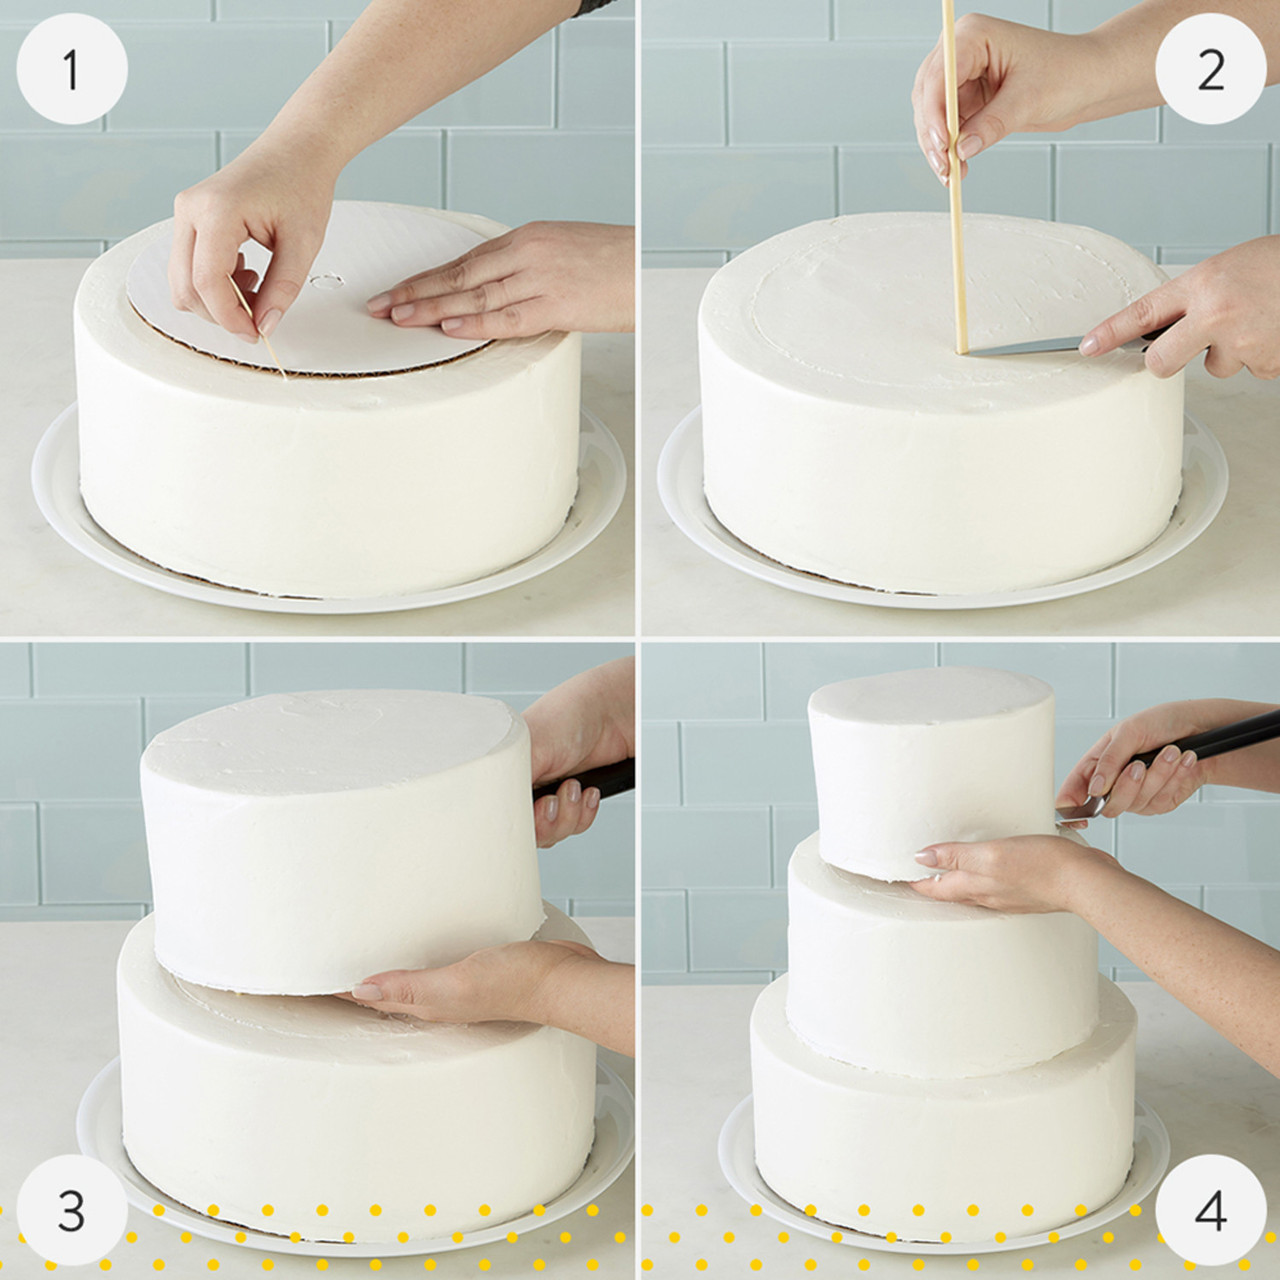 Stacked Tiered Cake Construction - Wilton